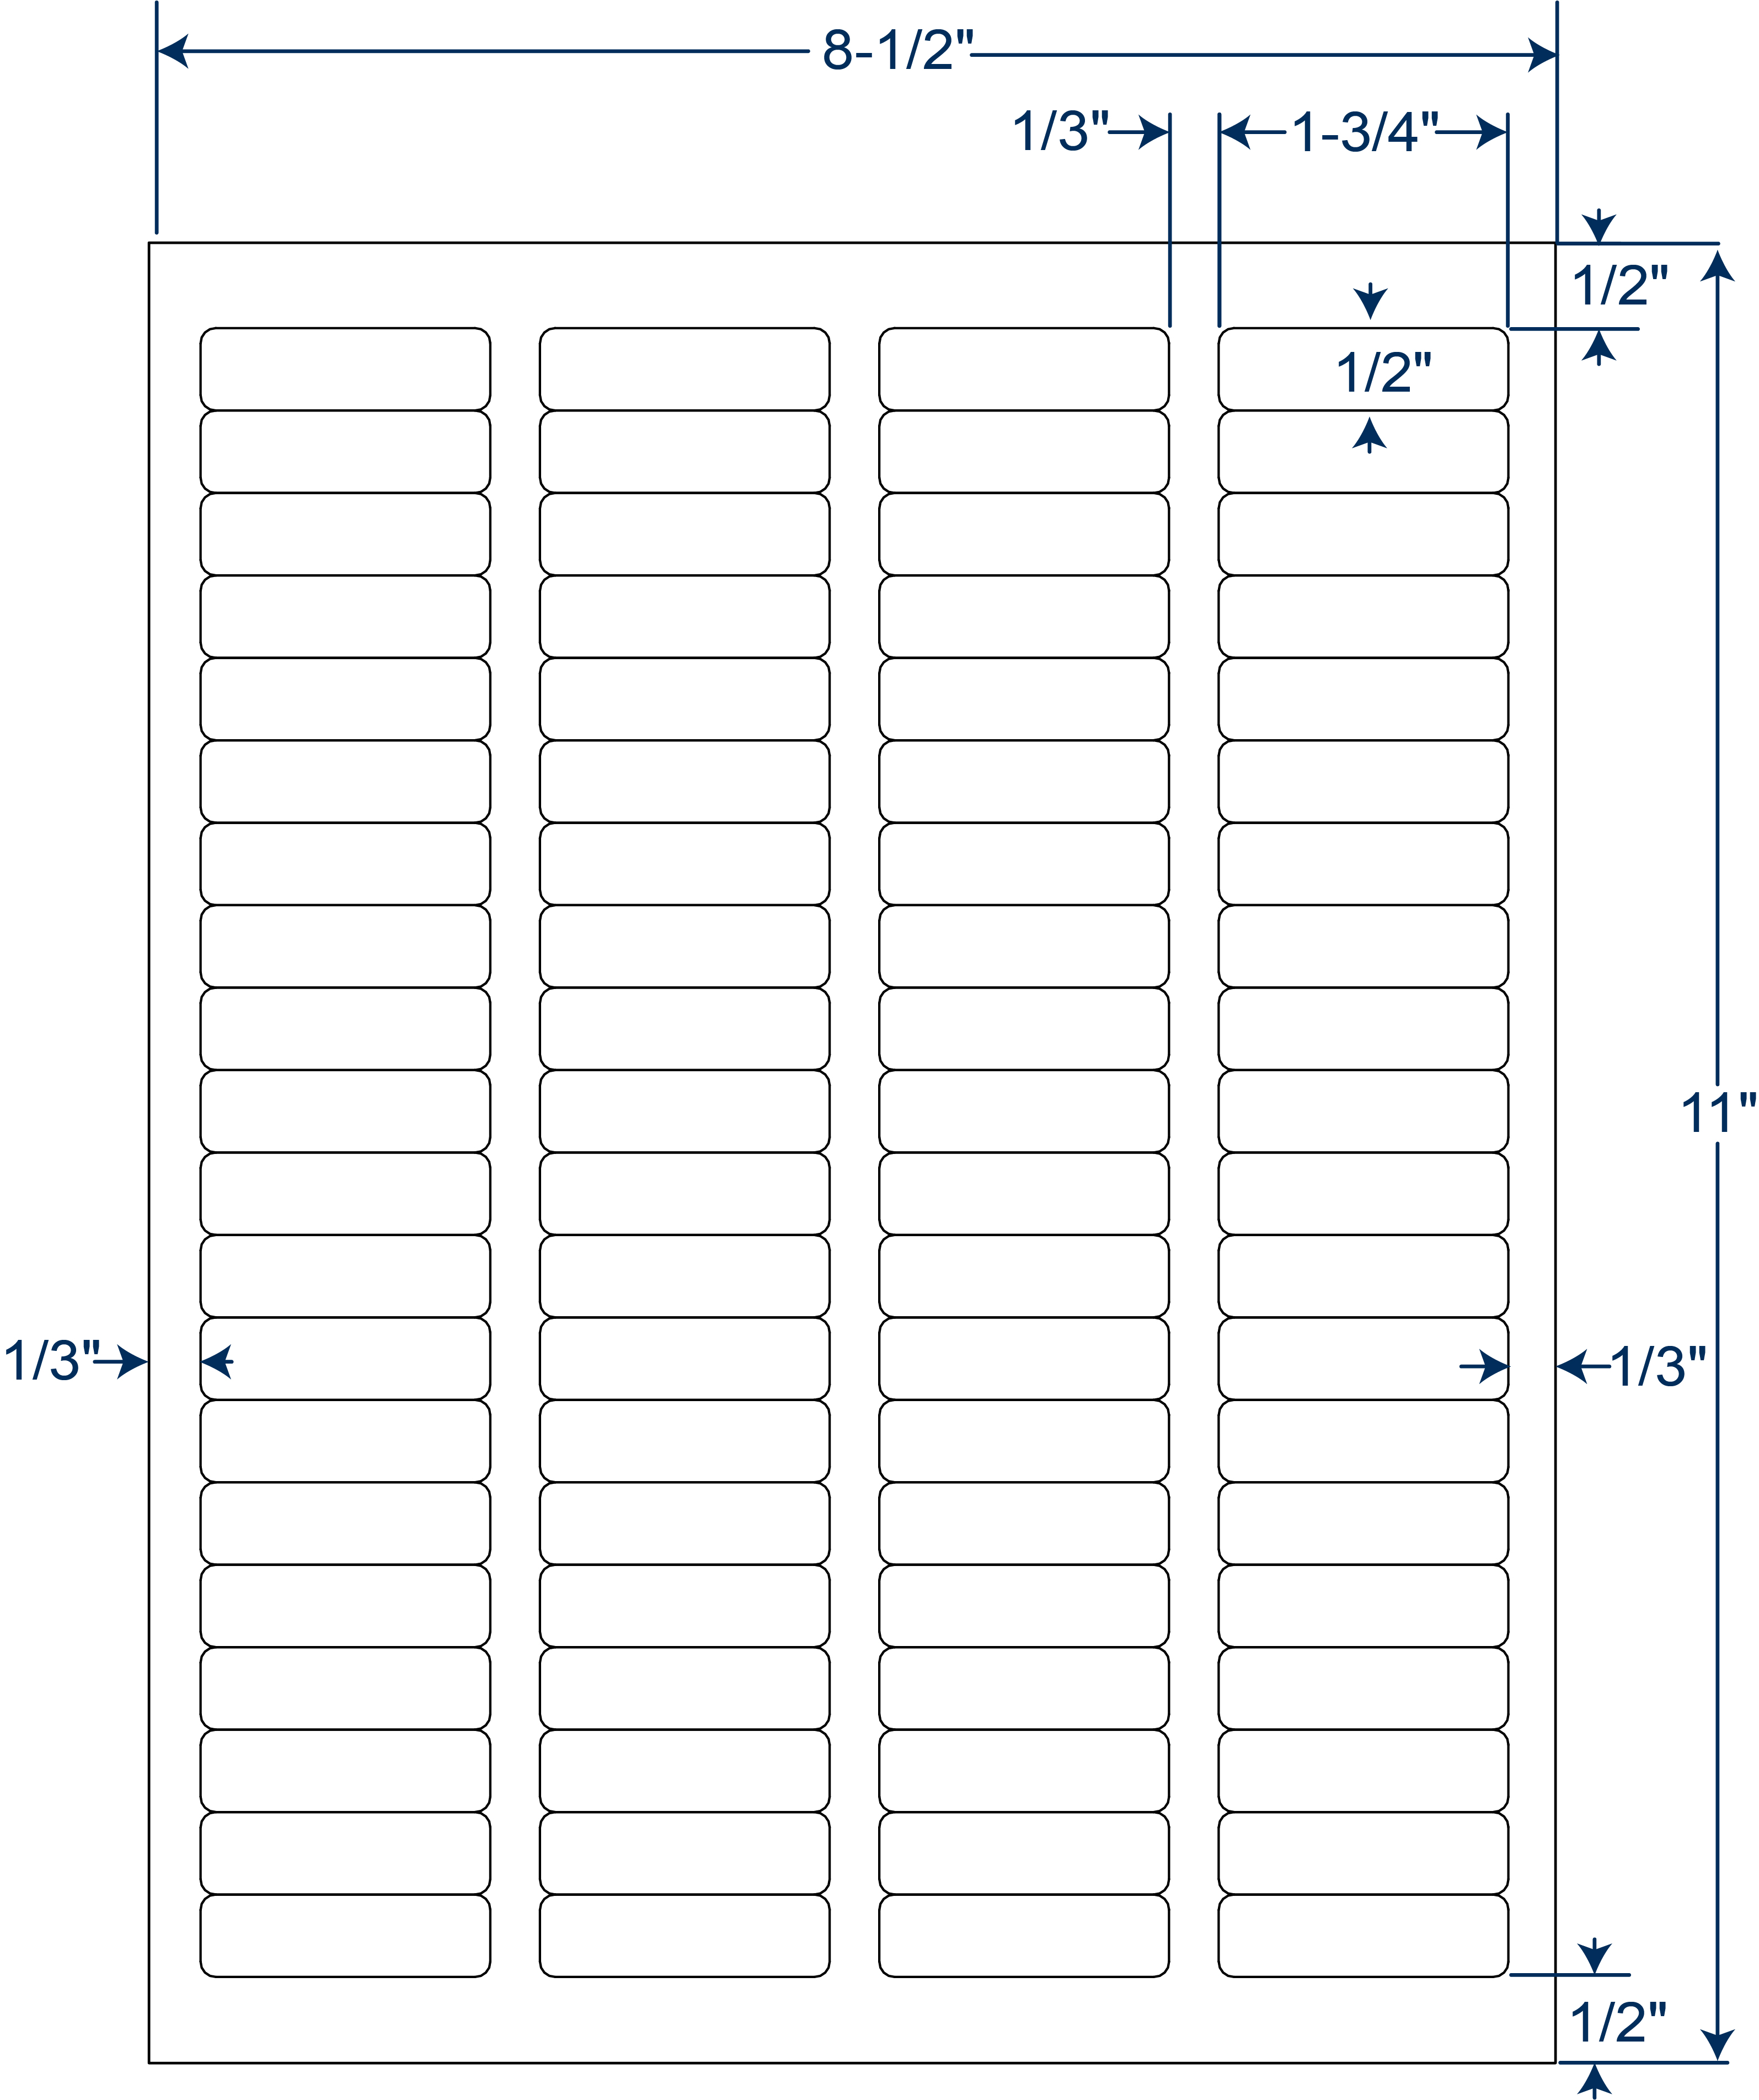 1-3/4" x 1/2" Permanent Sheeted Labels (1,000 Sheets)